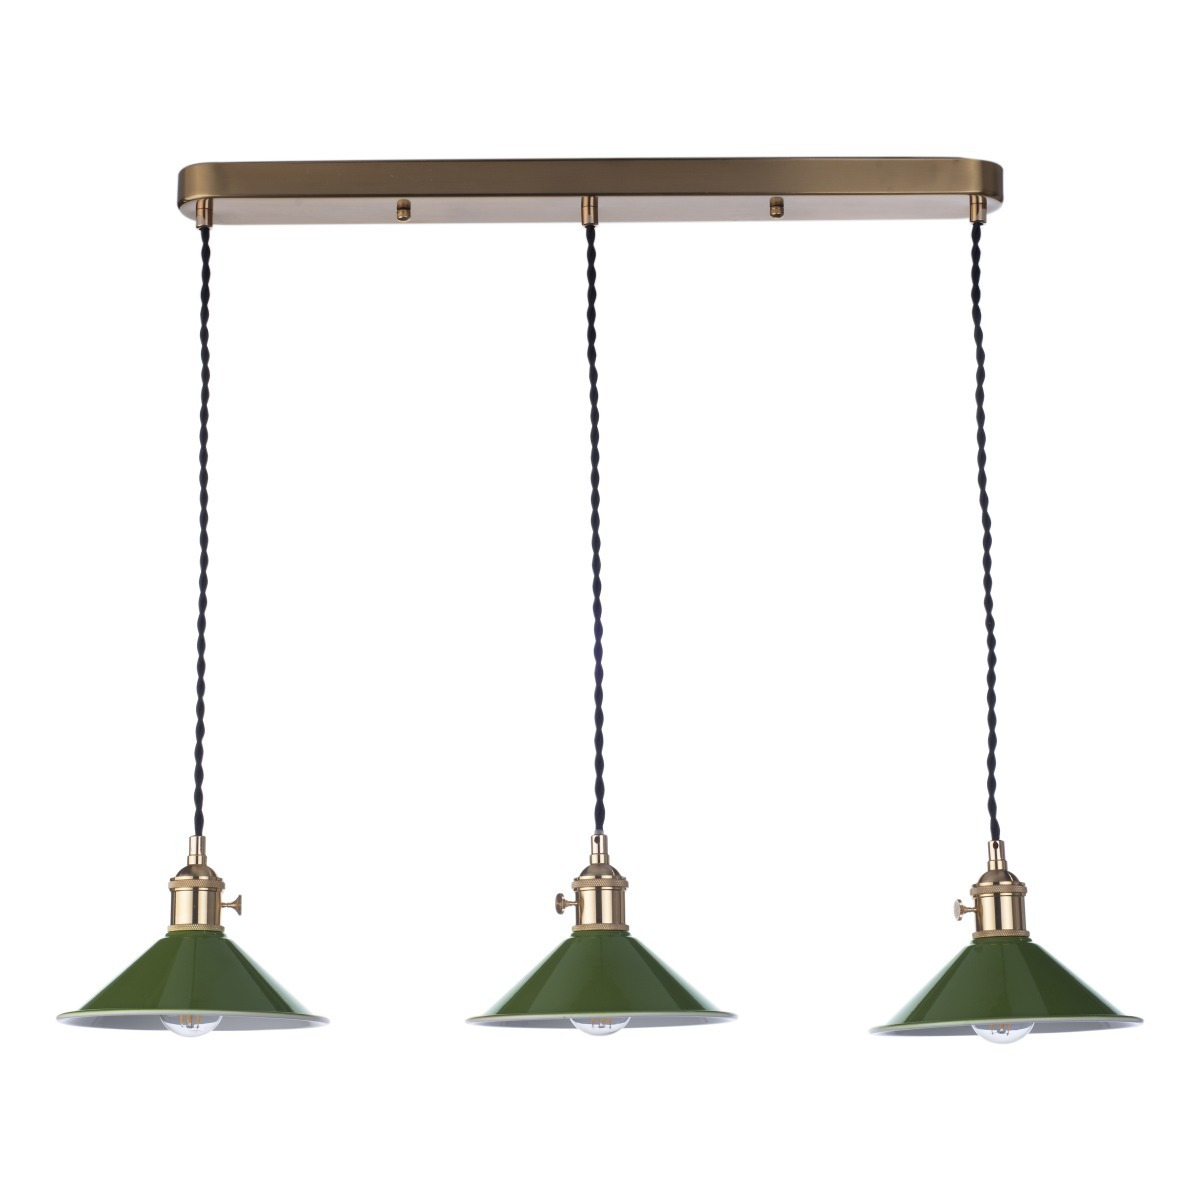 Dar Lighting Hadano 3 Light Bar Ceiling Pendant Light In Natural Brass With Olive Shades